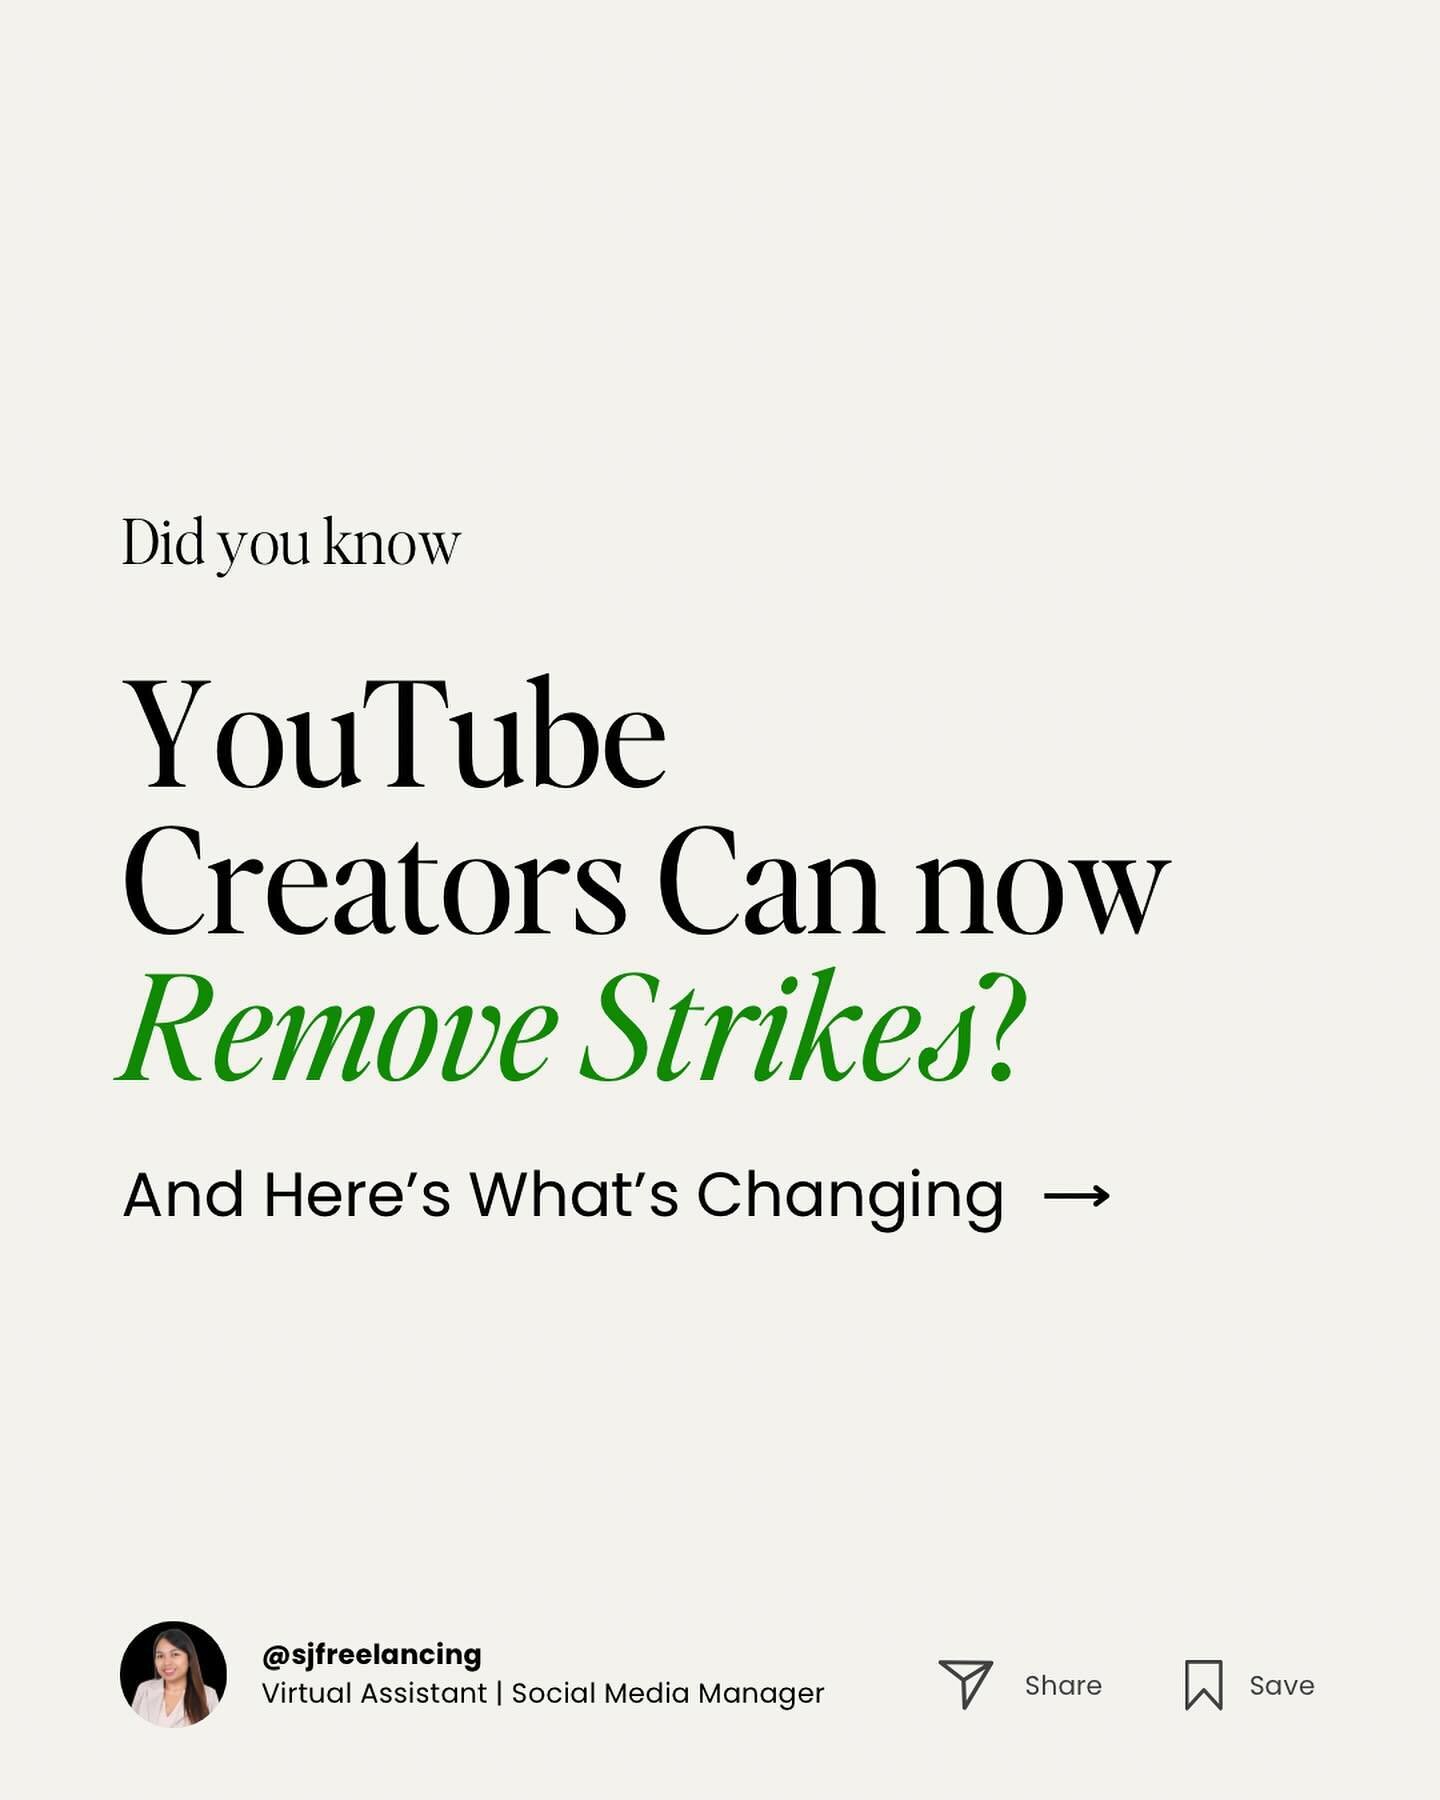 YouTube is shaking things up with a brand-new policy! Creators can now wave goodbye to those pesky community guideline violation warnings through educational training courses. This marks YouTube's first-ever standardized warning removal process.

So,